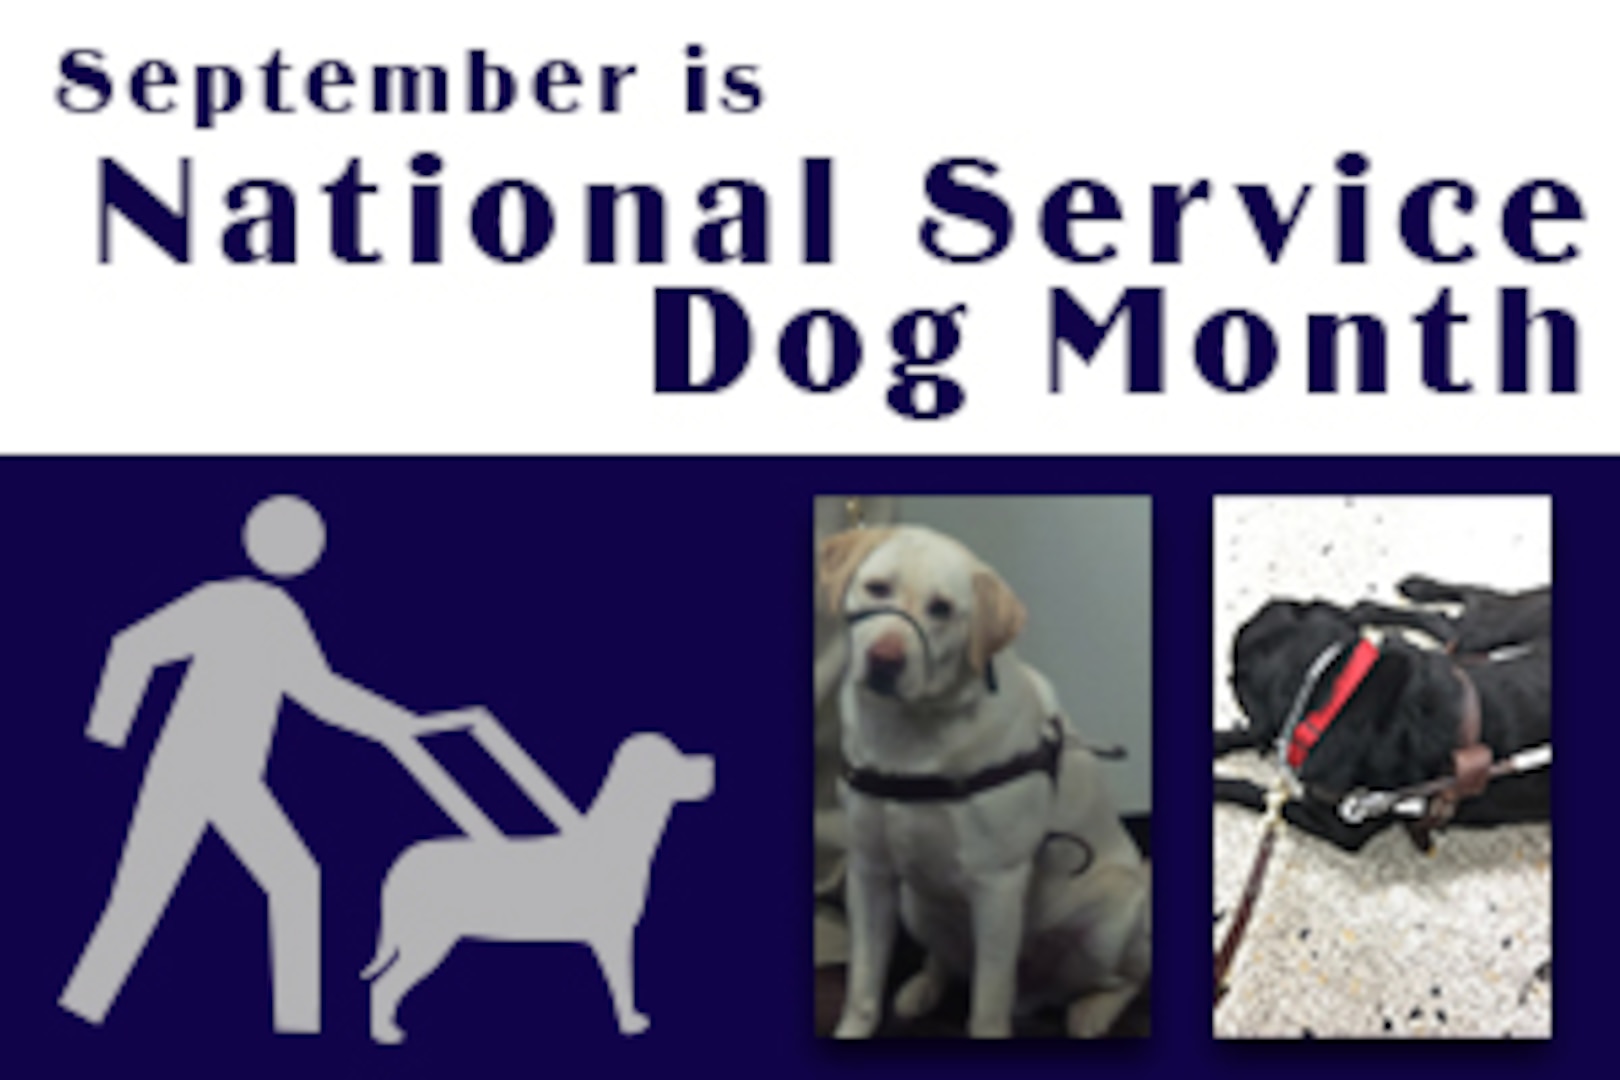 DLA Land and Maritime recognizes associates and their service dogs